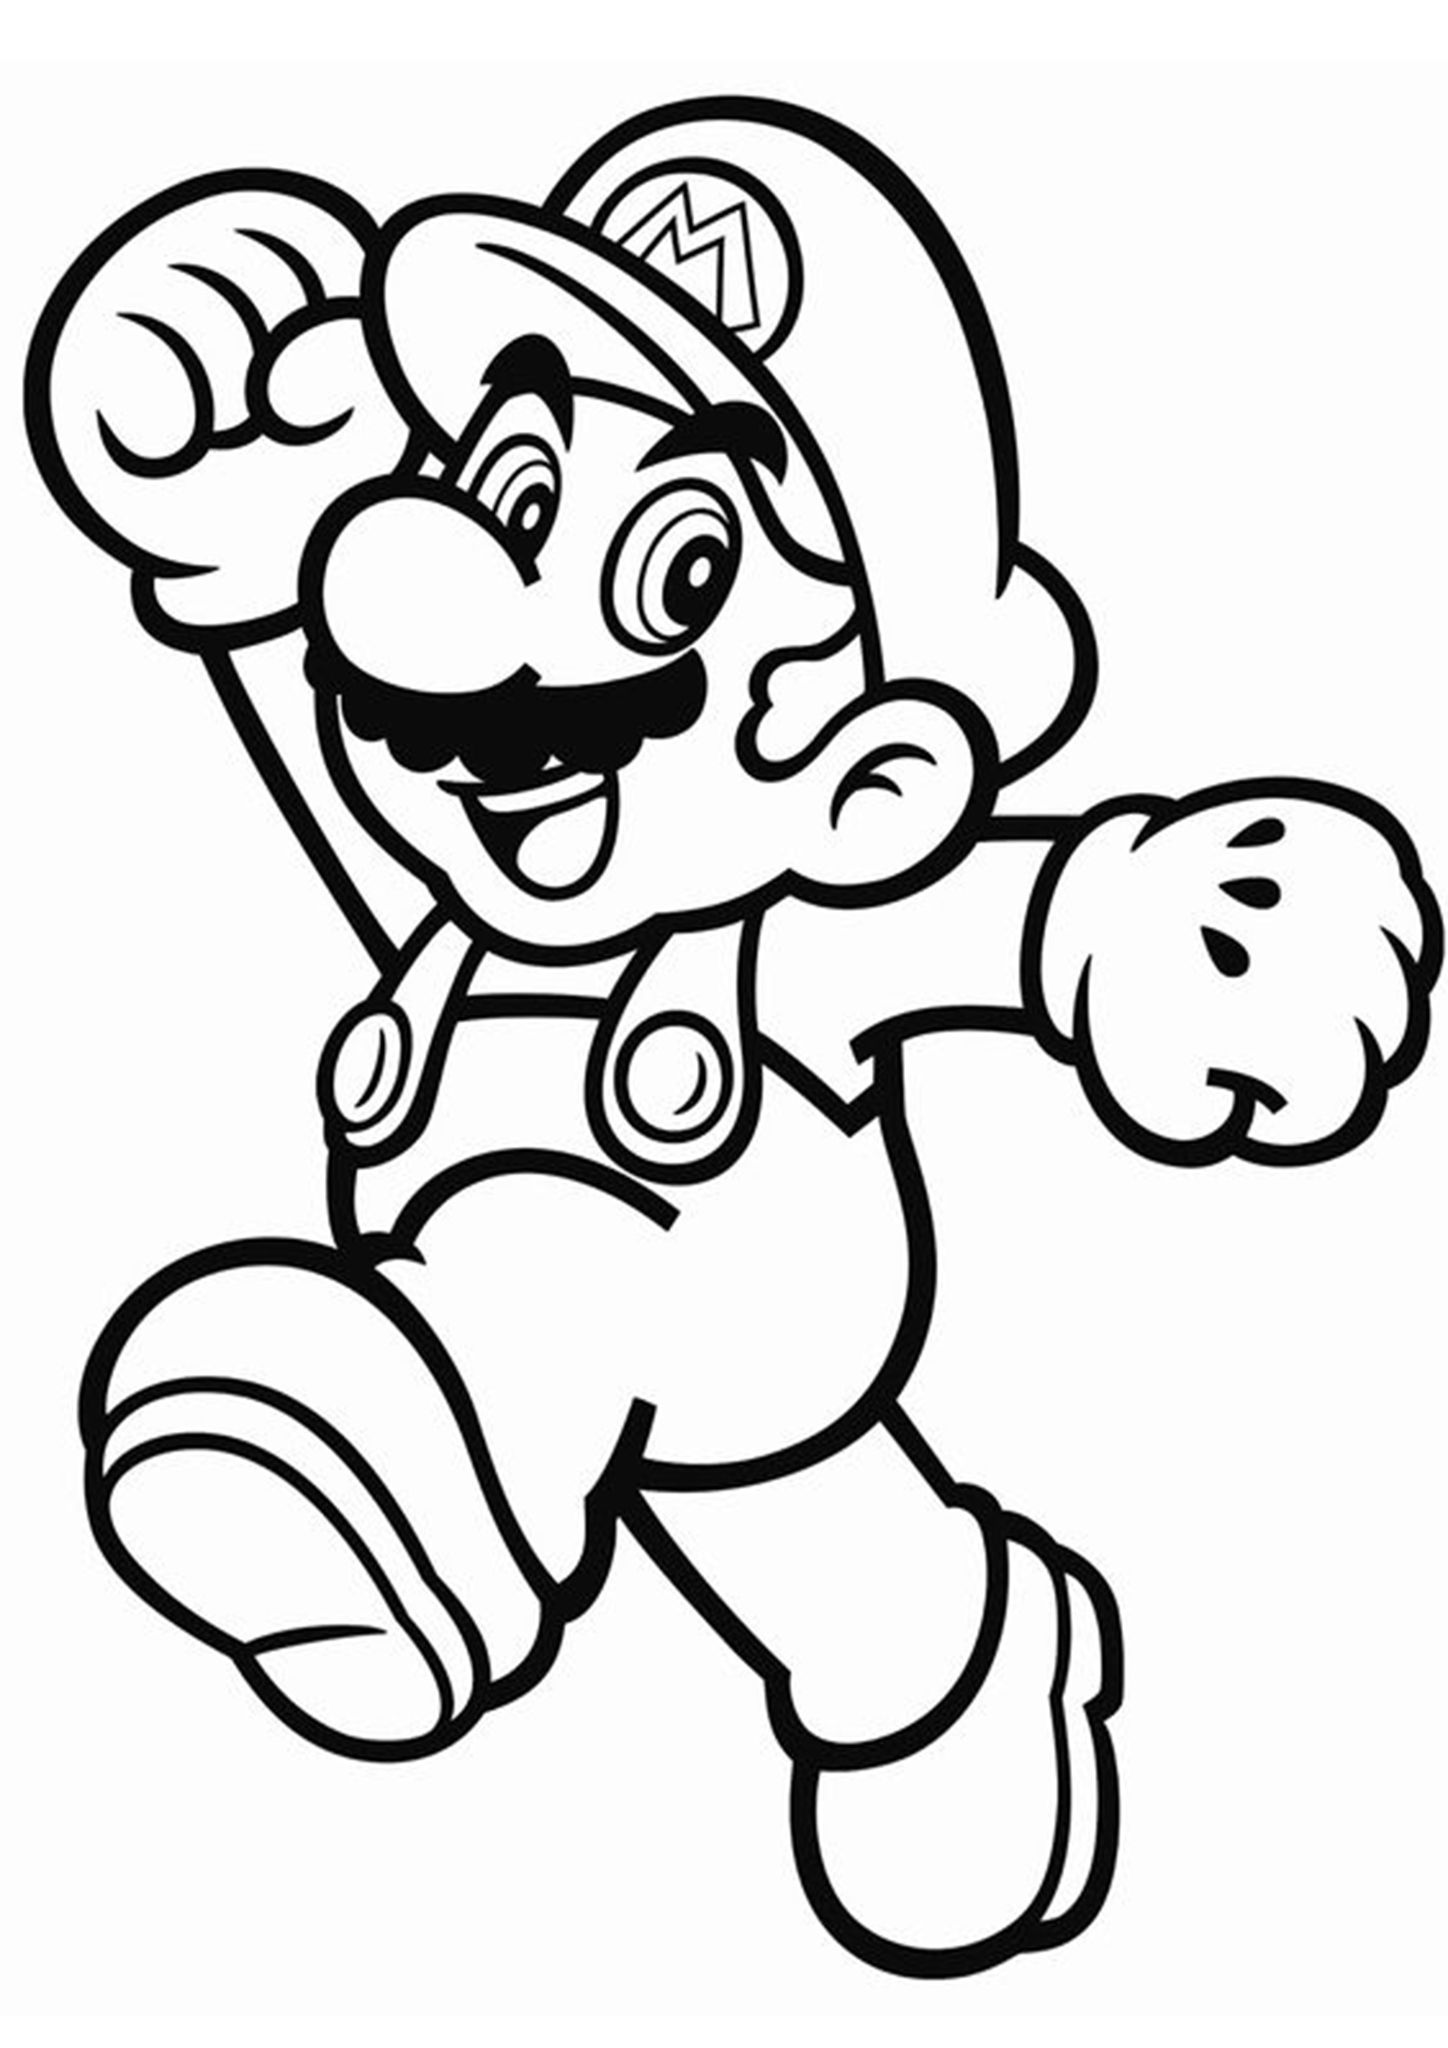 Free easy to print mario coloring page super mario coloring pages cartoon coloring pages mario coloring pages